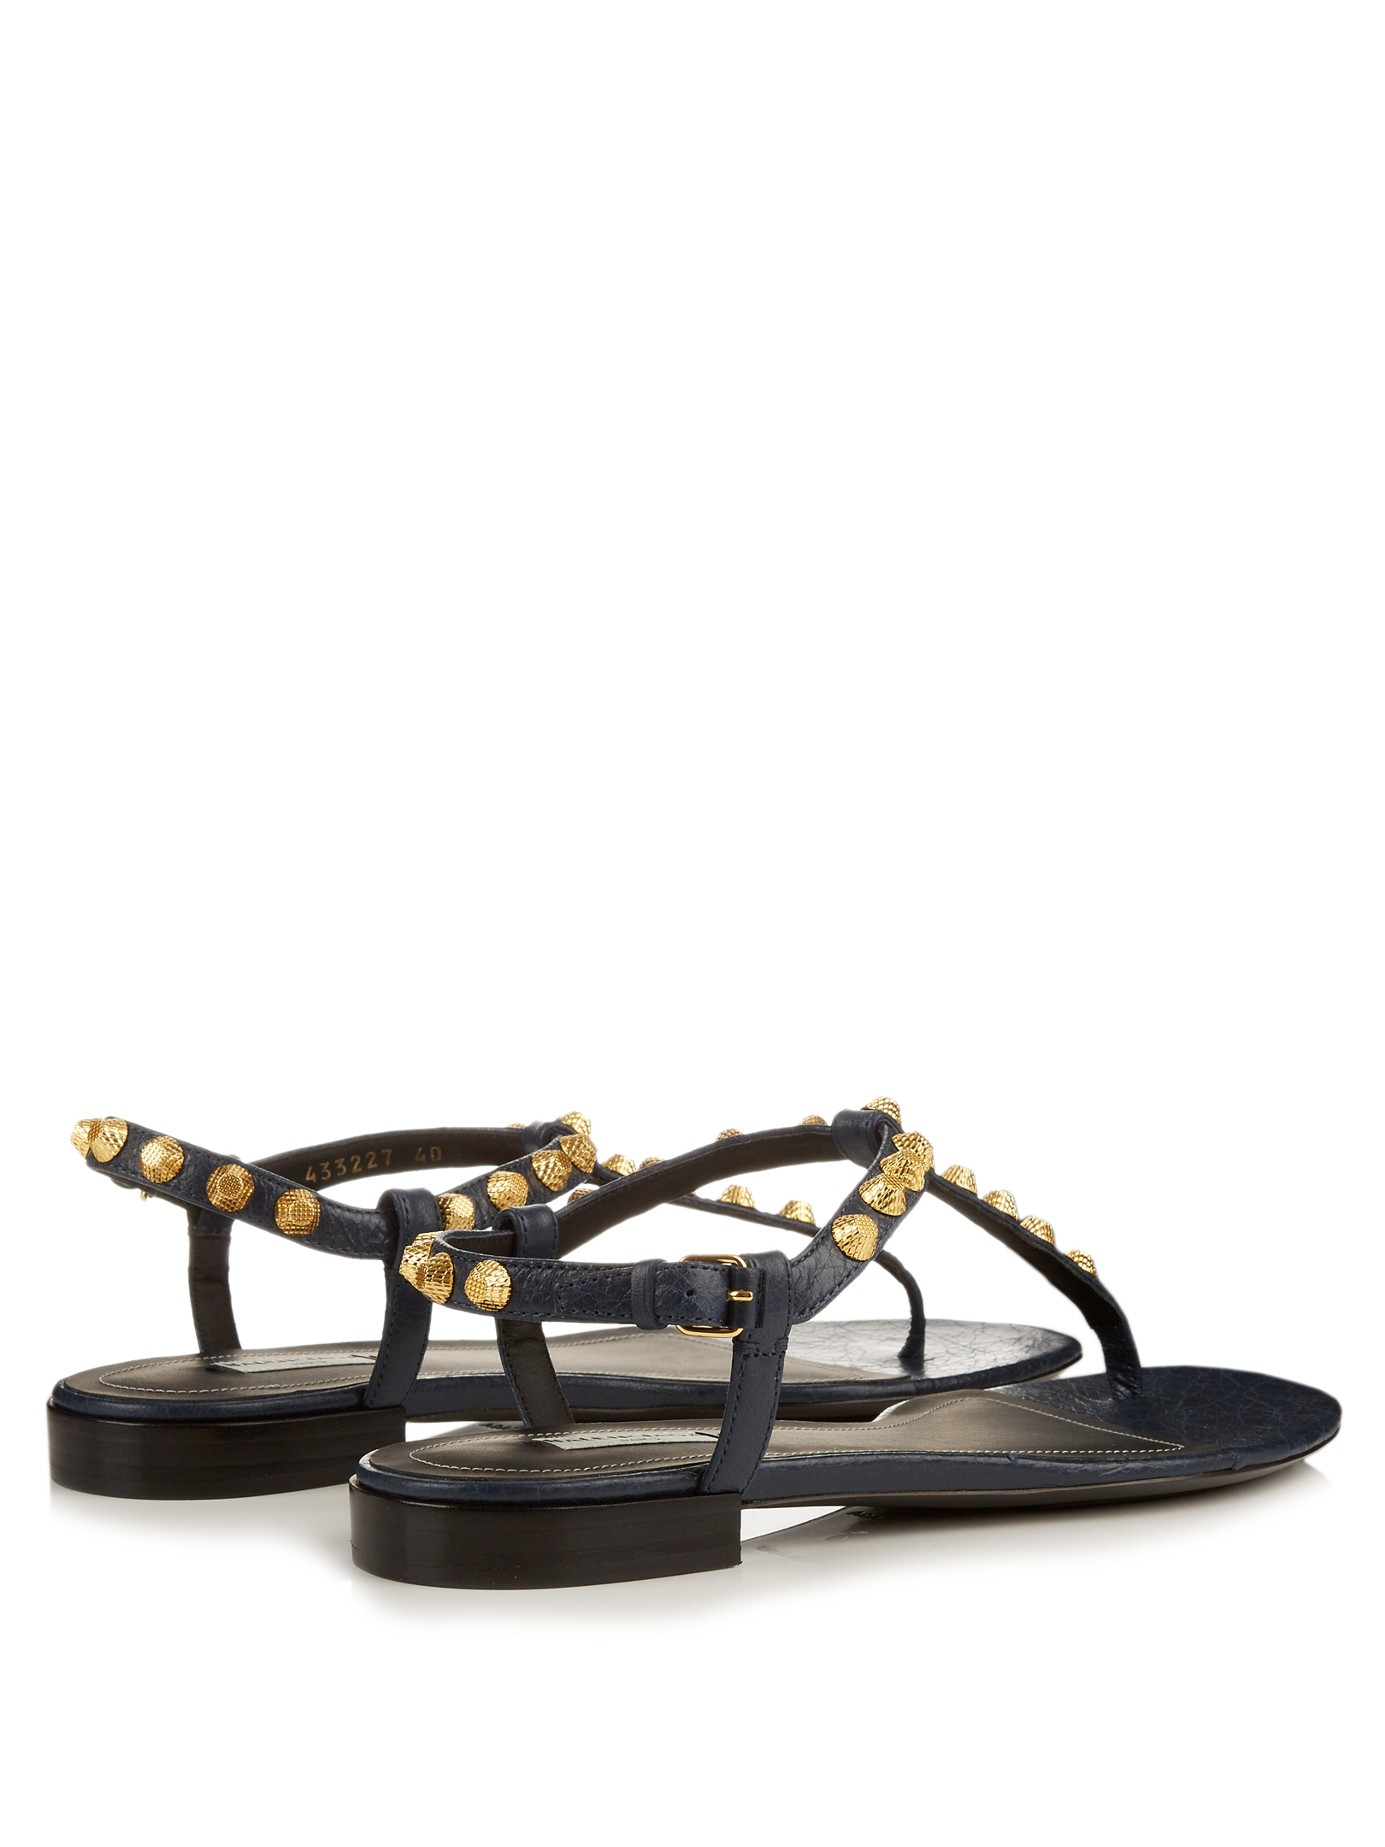 Lyst - Balenciaga Arena Studded Leather Sandals in Blue